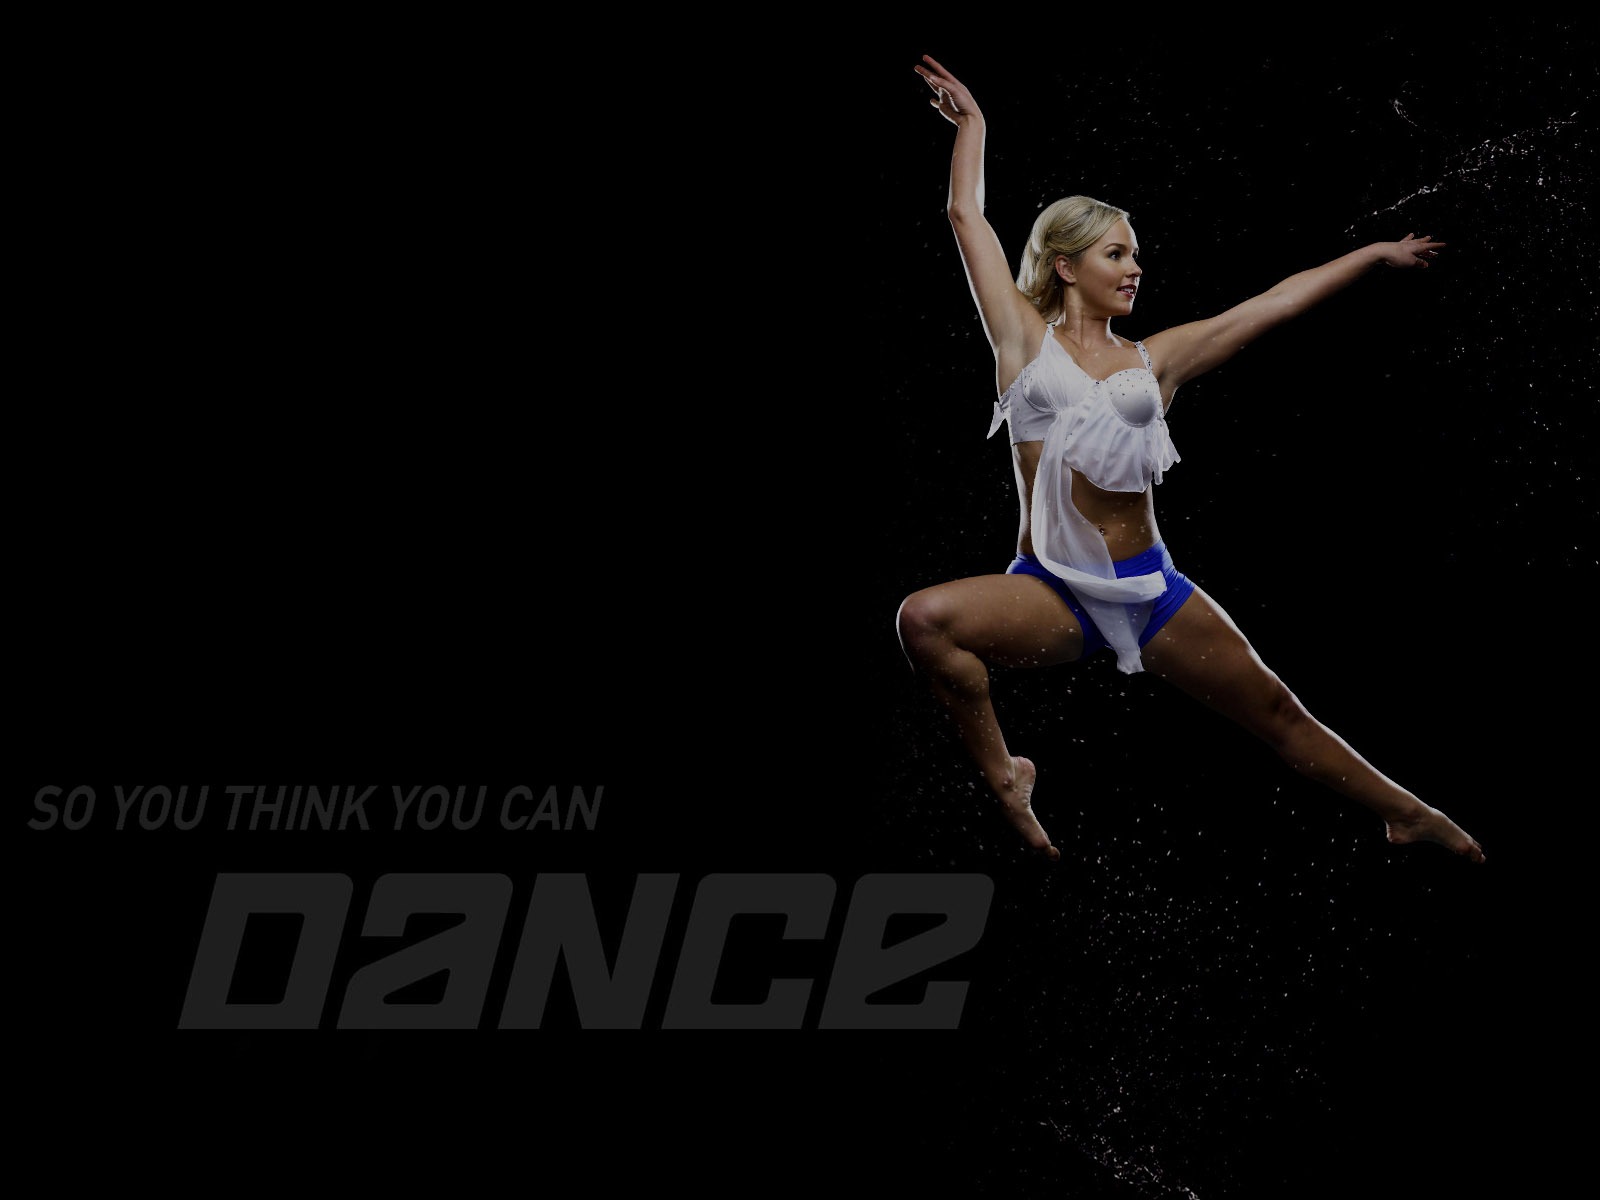 So You Think You Can Dance wallpaper (2) #11 - 1600x1200